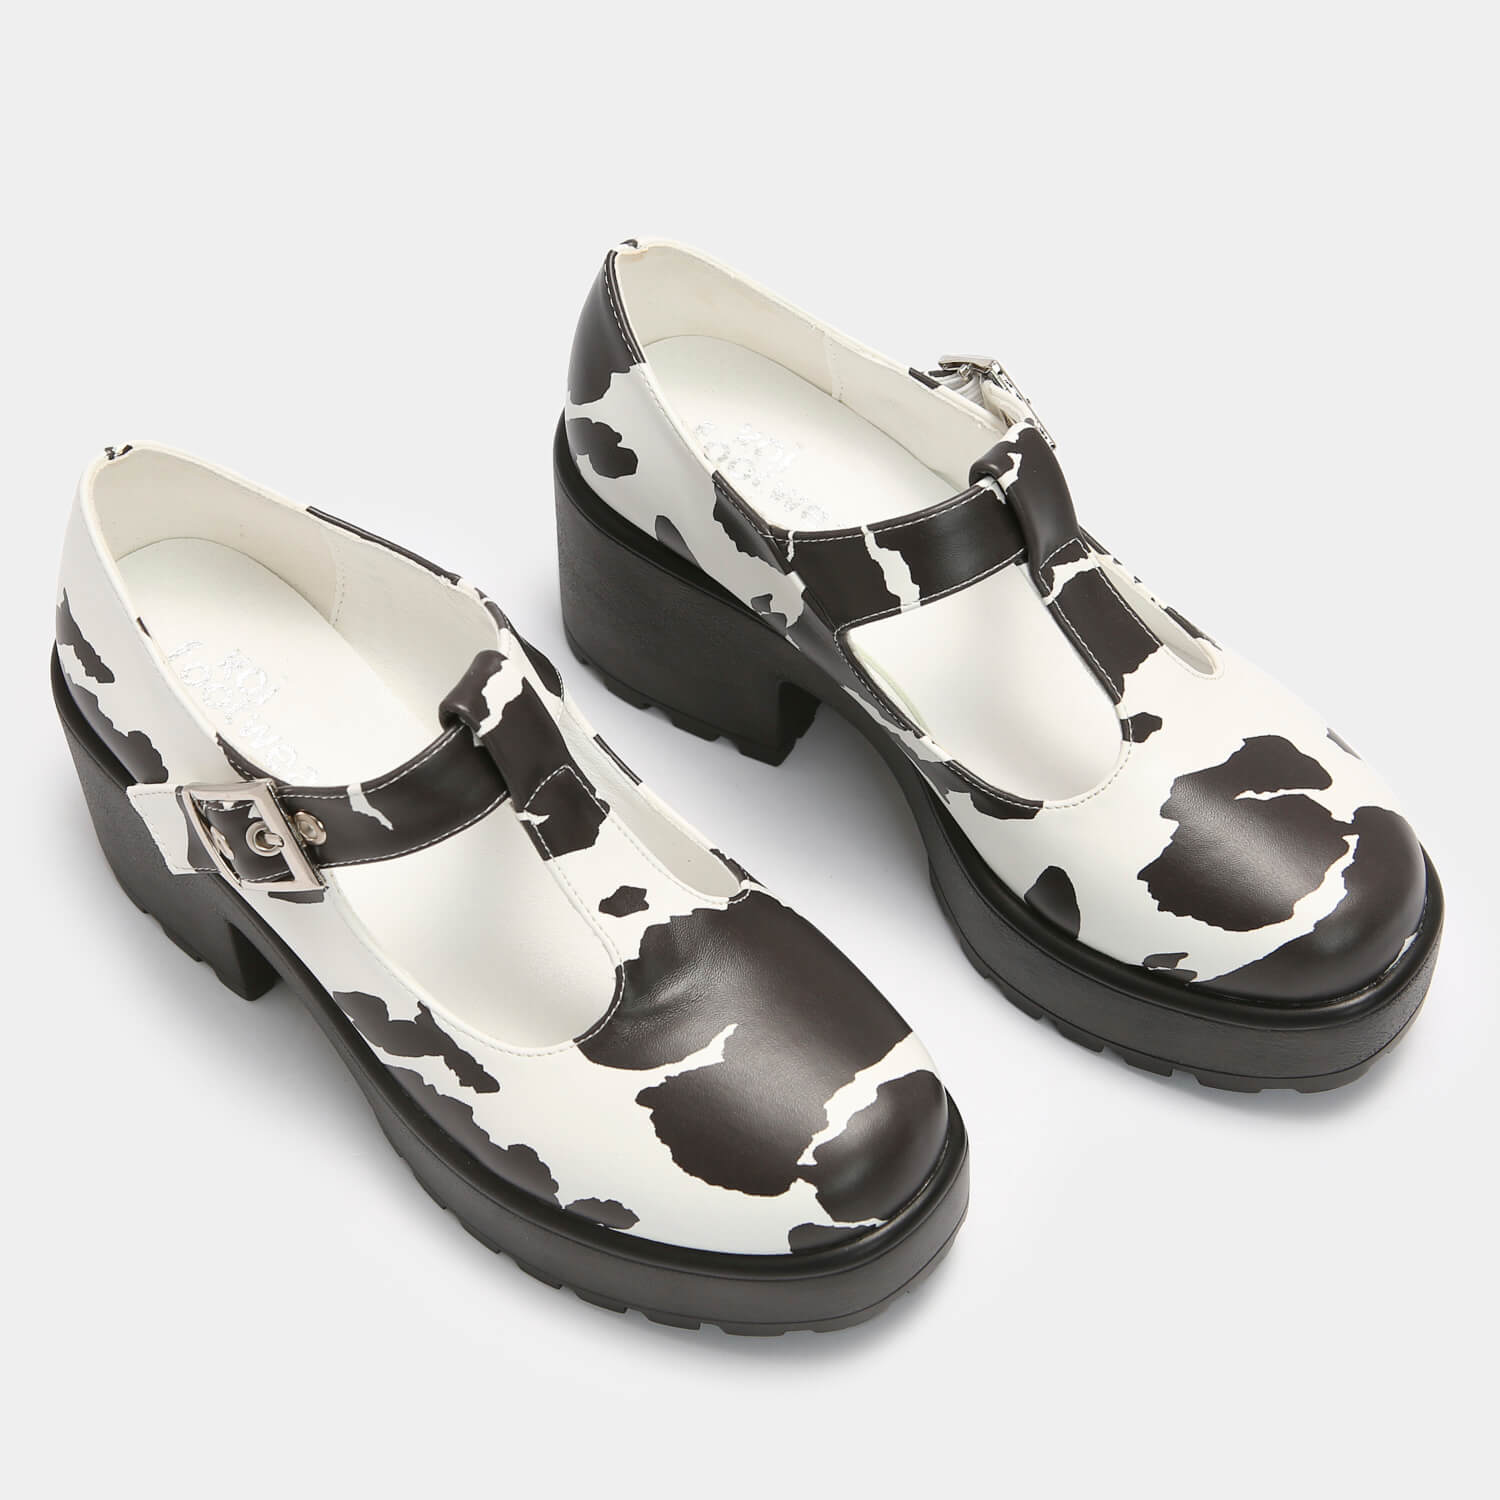 Sai Cow Print Mary Jane Shoes 'Nettie Edition' - Mary Janes - KOI Footwear - White - Top View